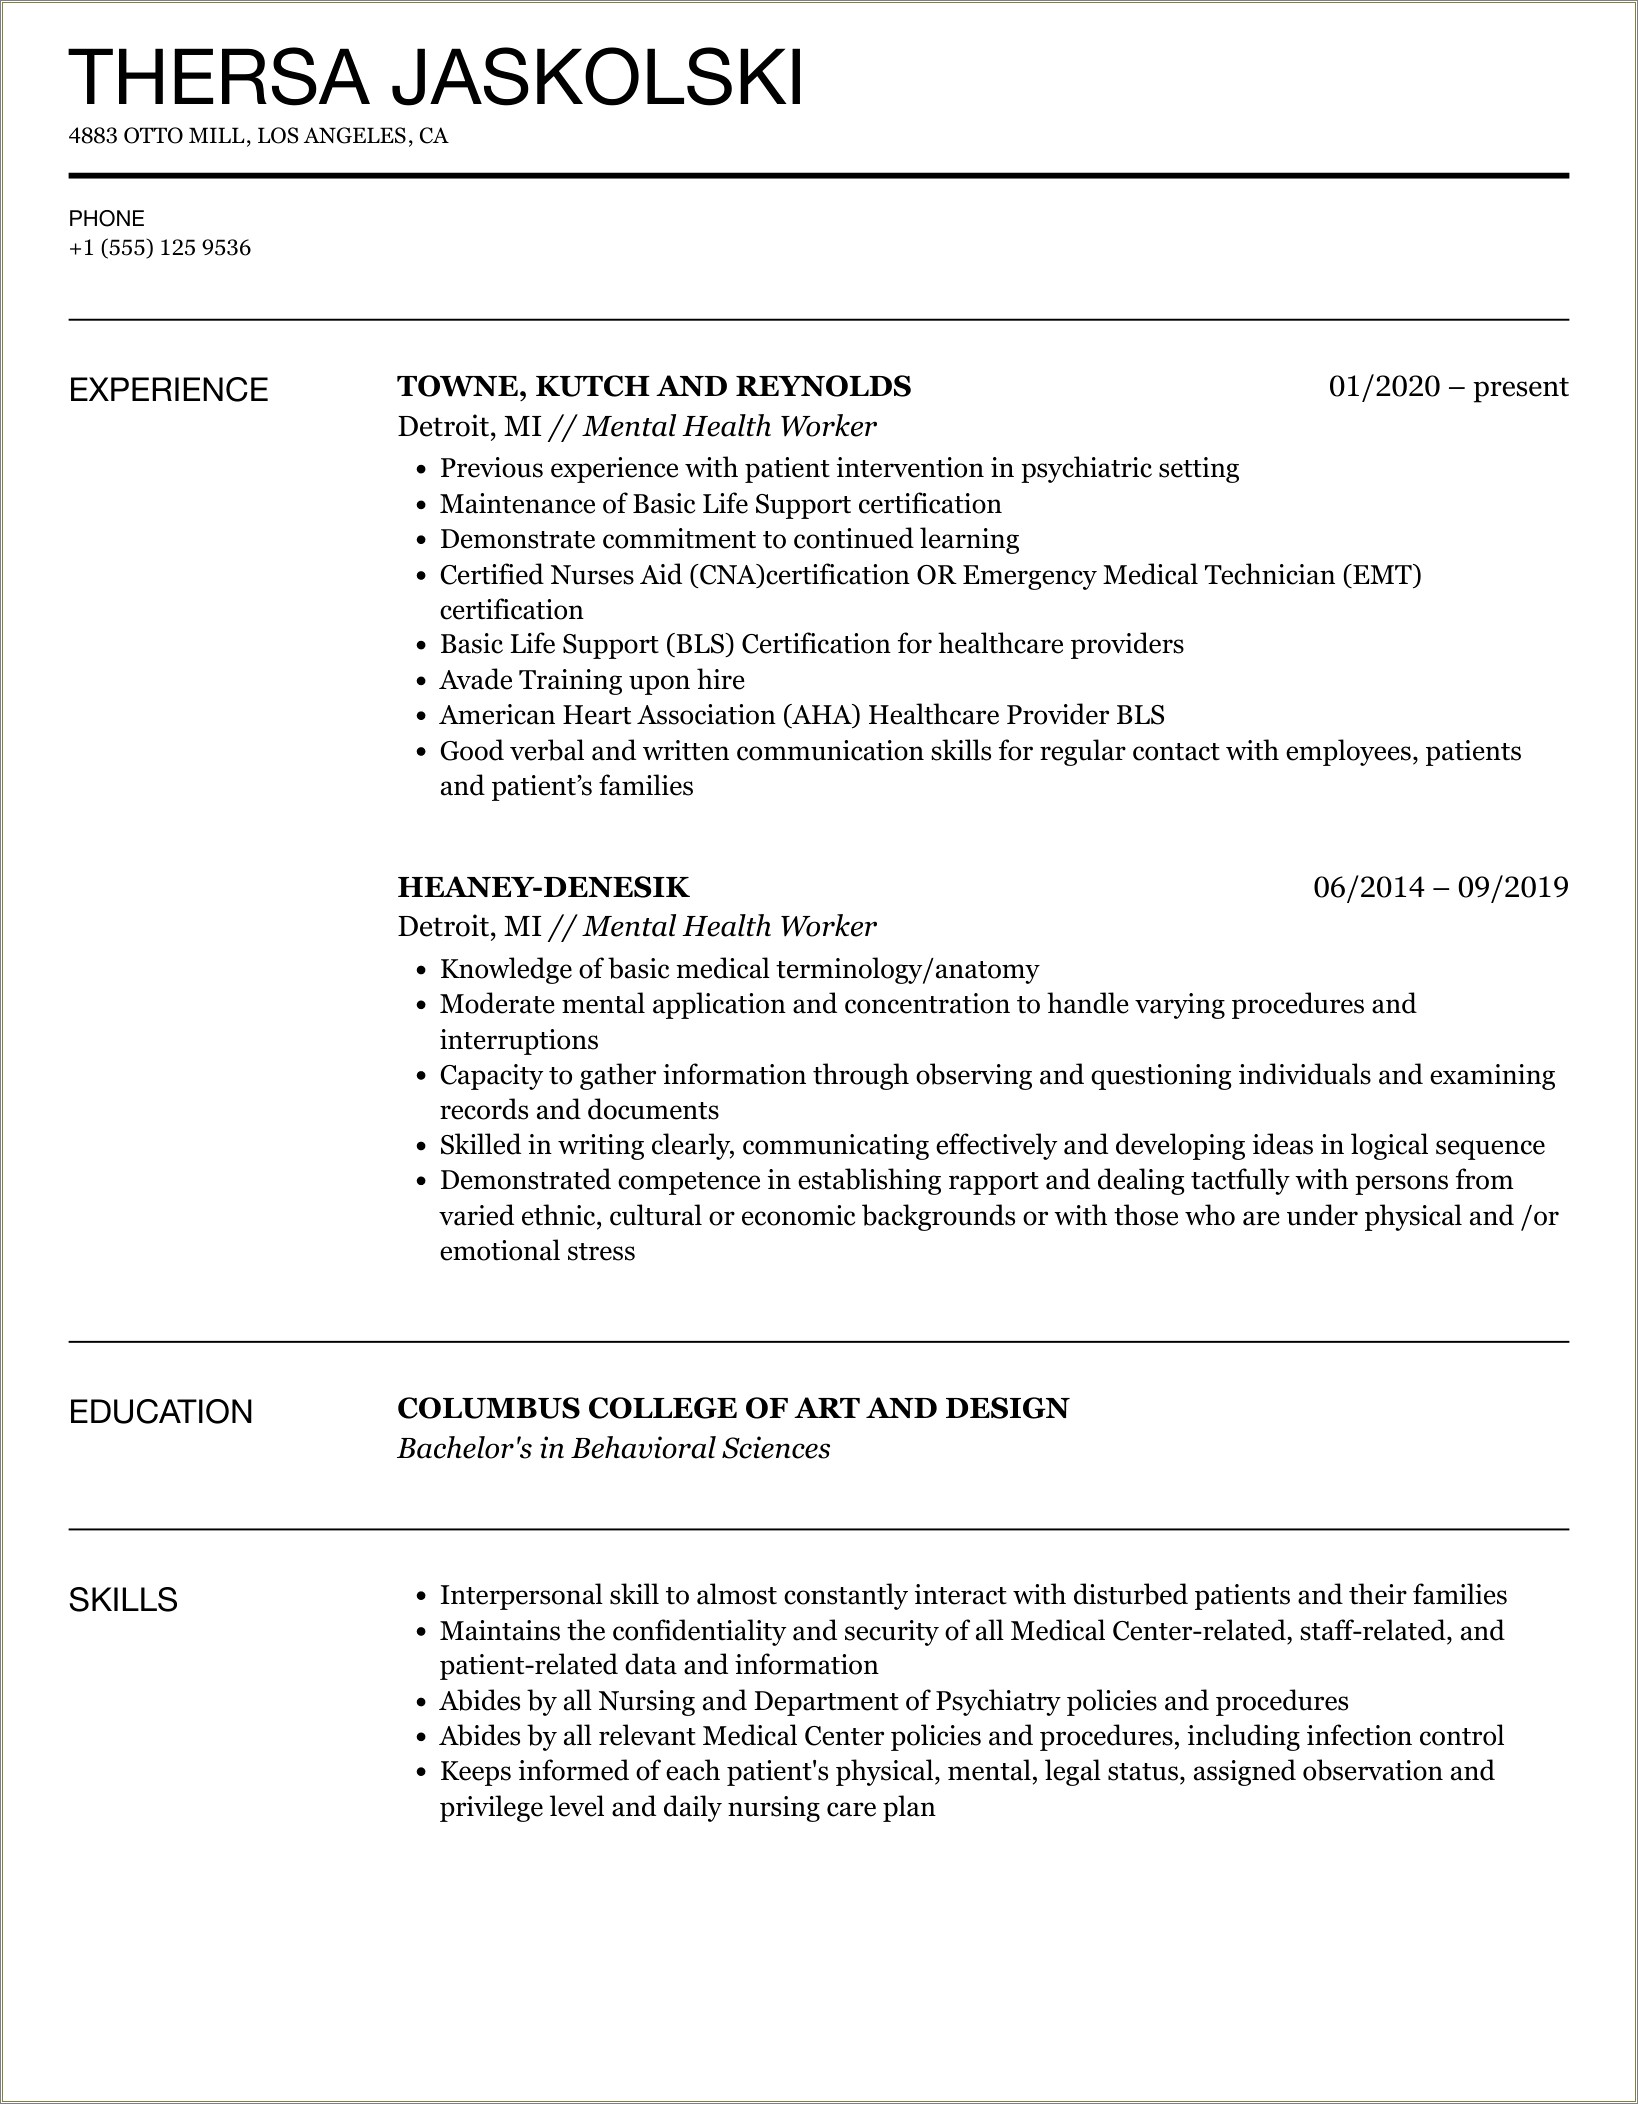 Addiction And Mental Health Worker Resume